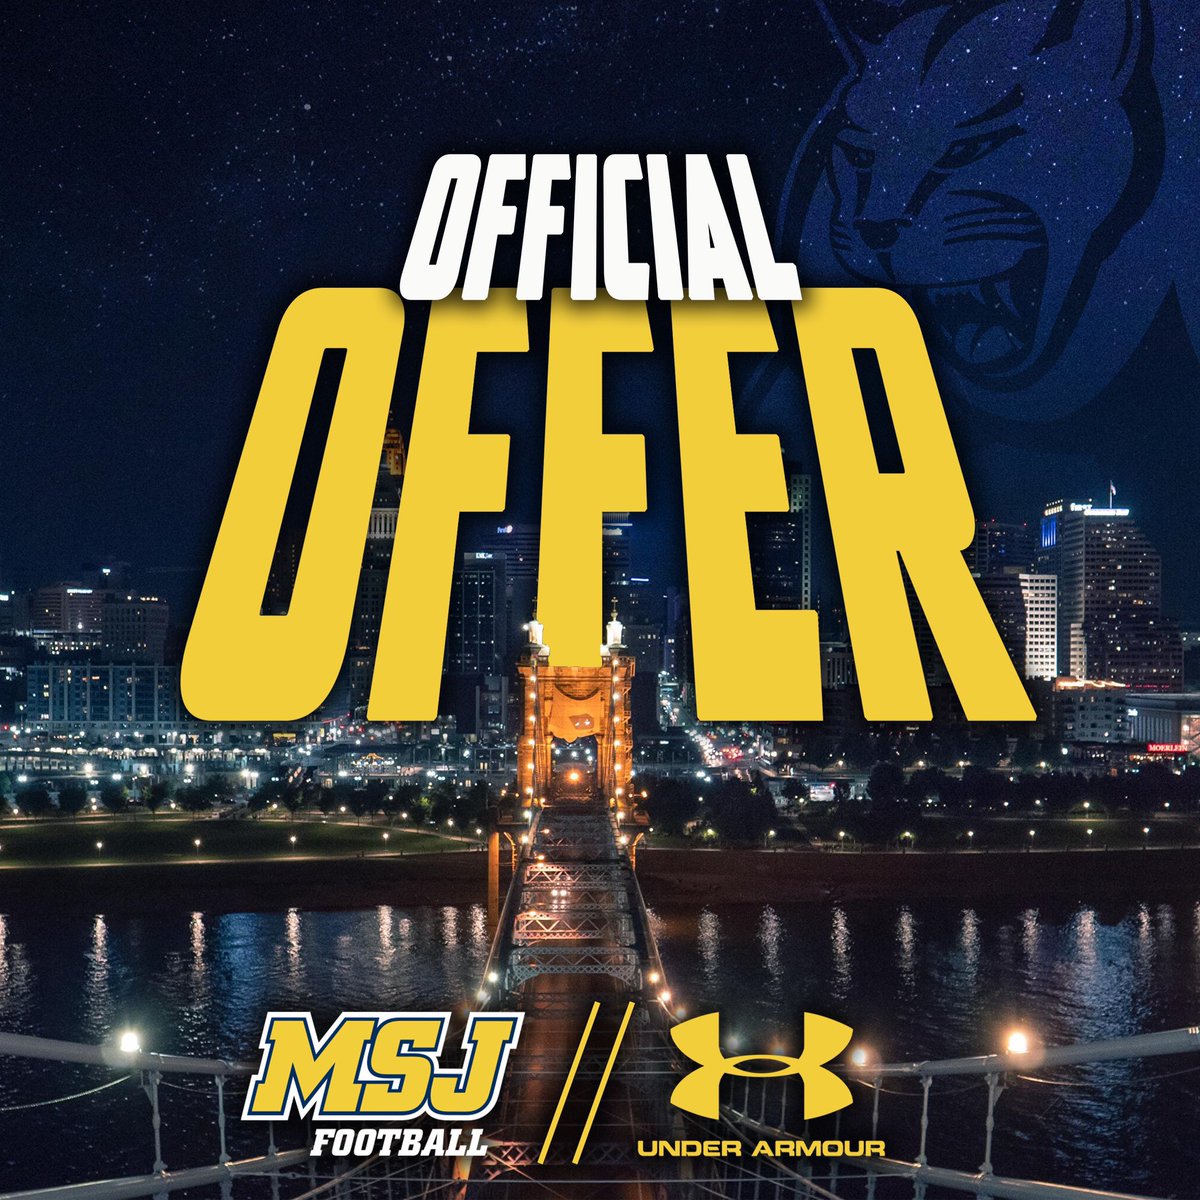 Blessed and excited to receive my first offer from @MSJ_FB! Had a great morning meeting with @CalebCorrill @CoachHopperton @JT_FTF. Excited for the next chapter. Thank you to my HS coaches @_AHS_Football @AHS_TDClub @CoachEvanDreyer @coachveil #workswins #juniorday